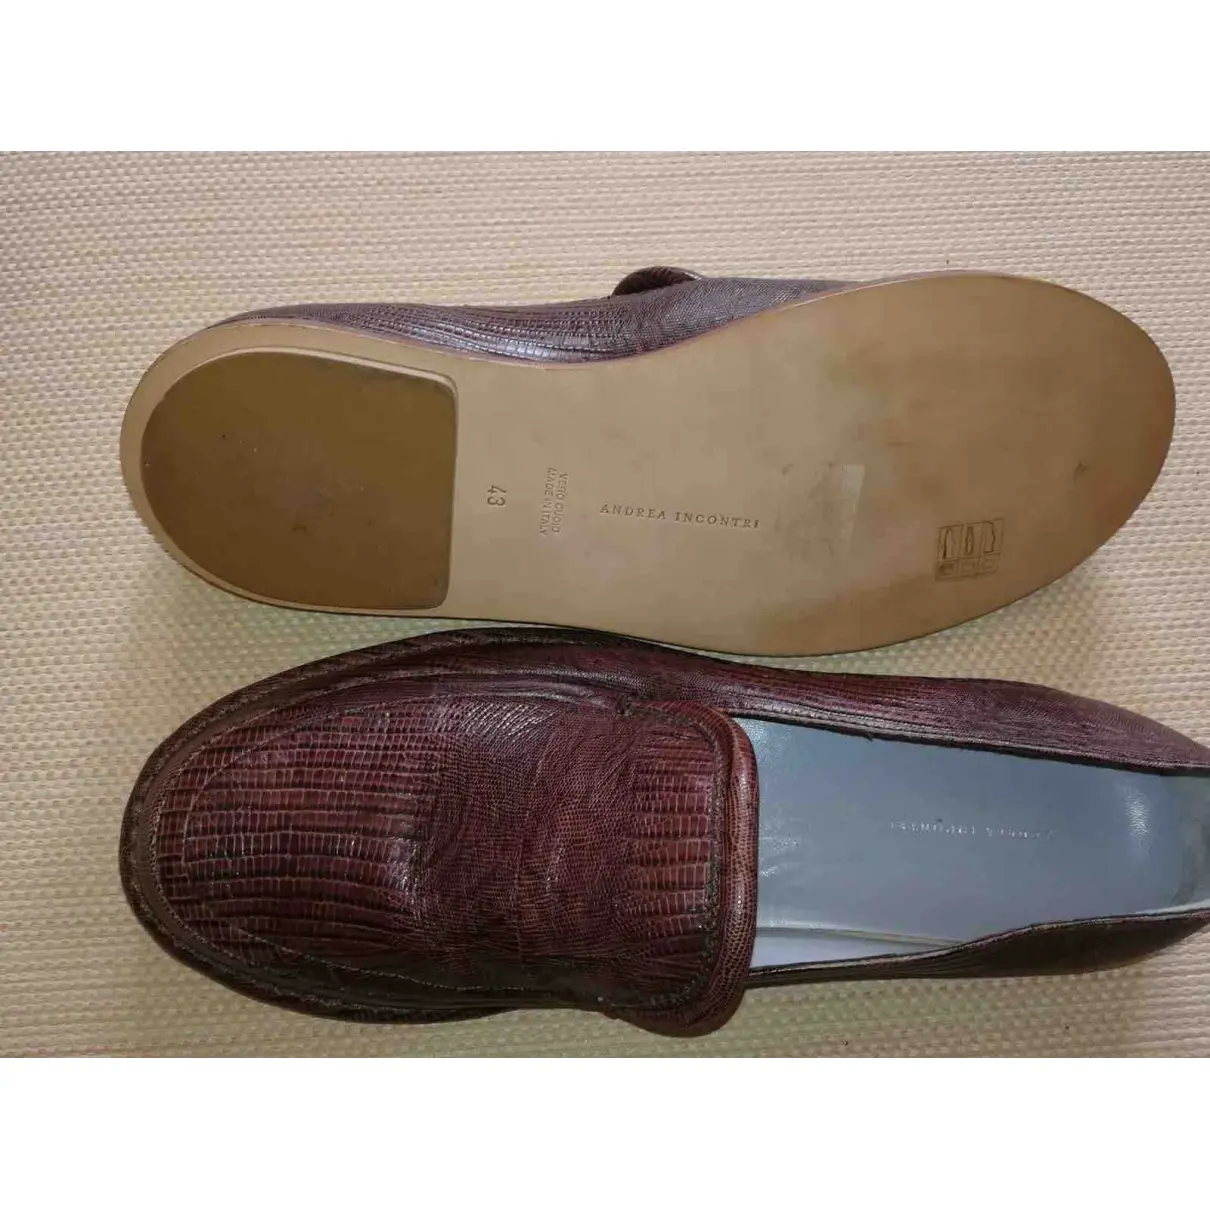 Buy Andrea Incontri Leather flats online